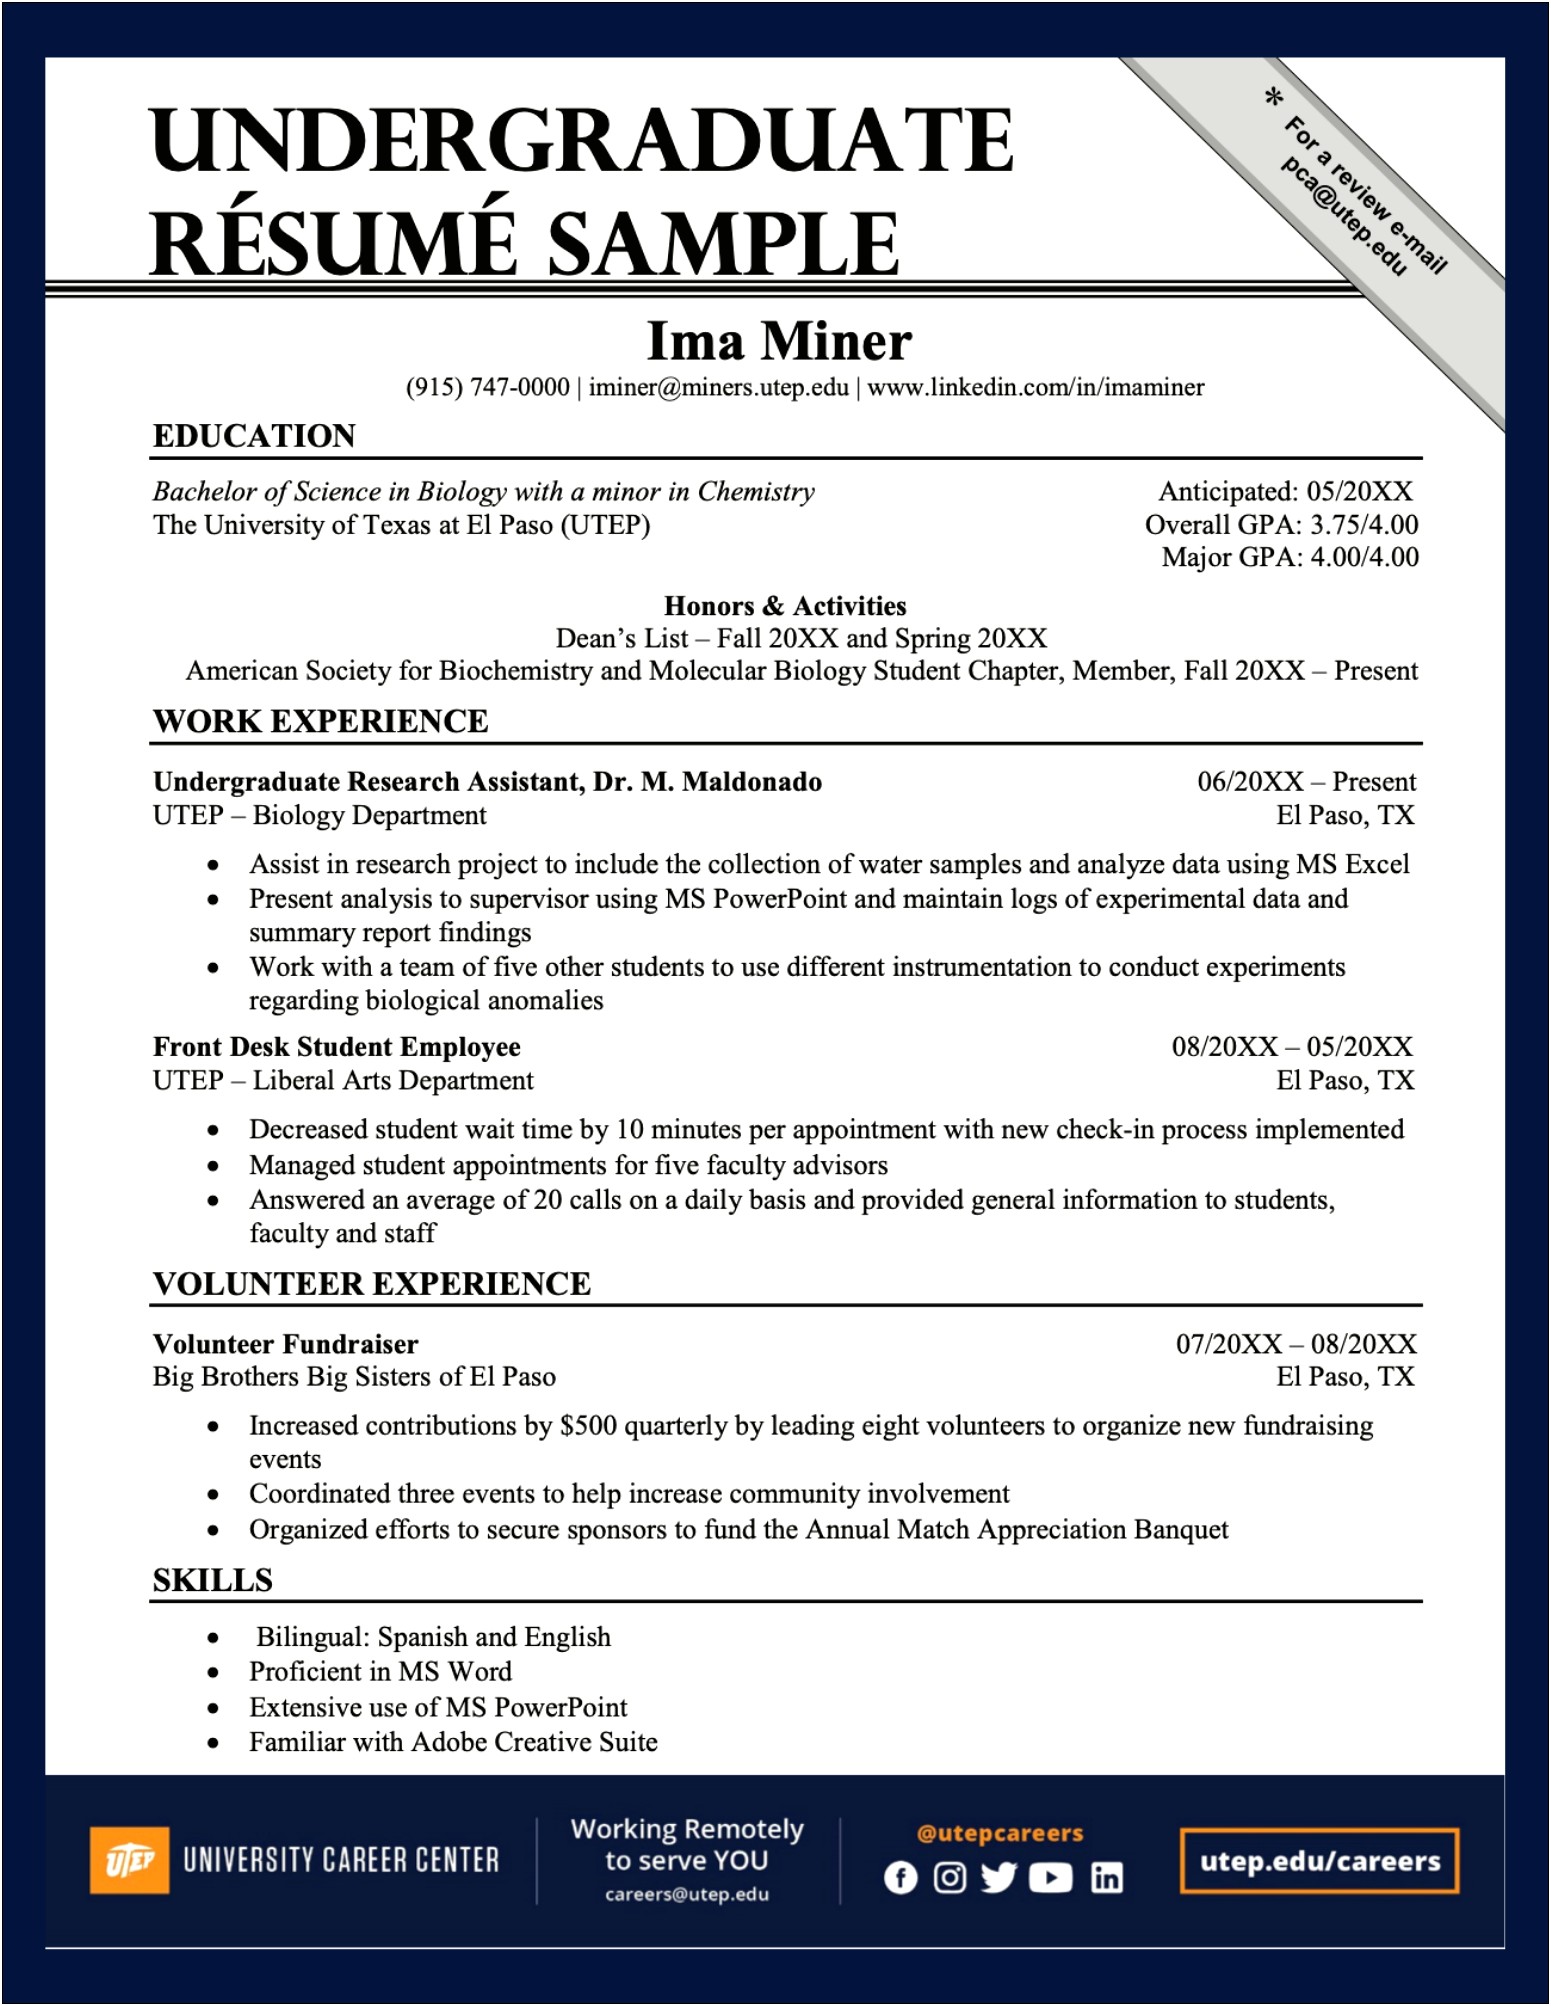 Resume Samples With A Minor